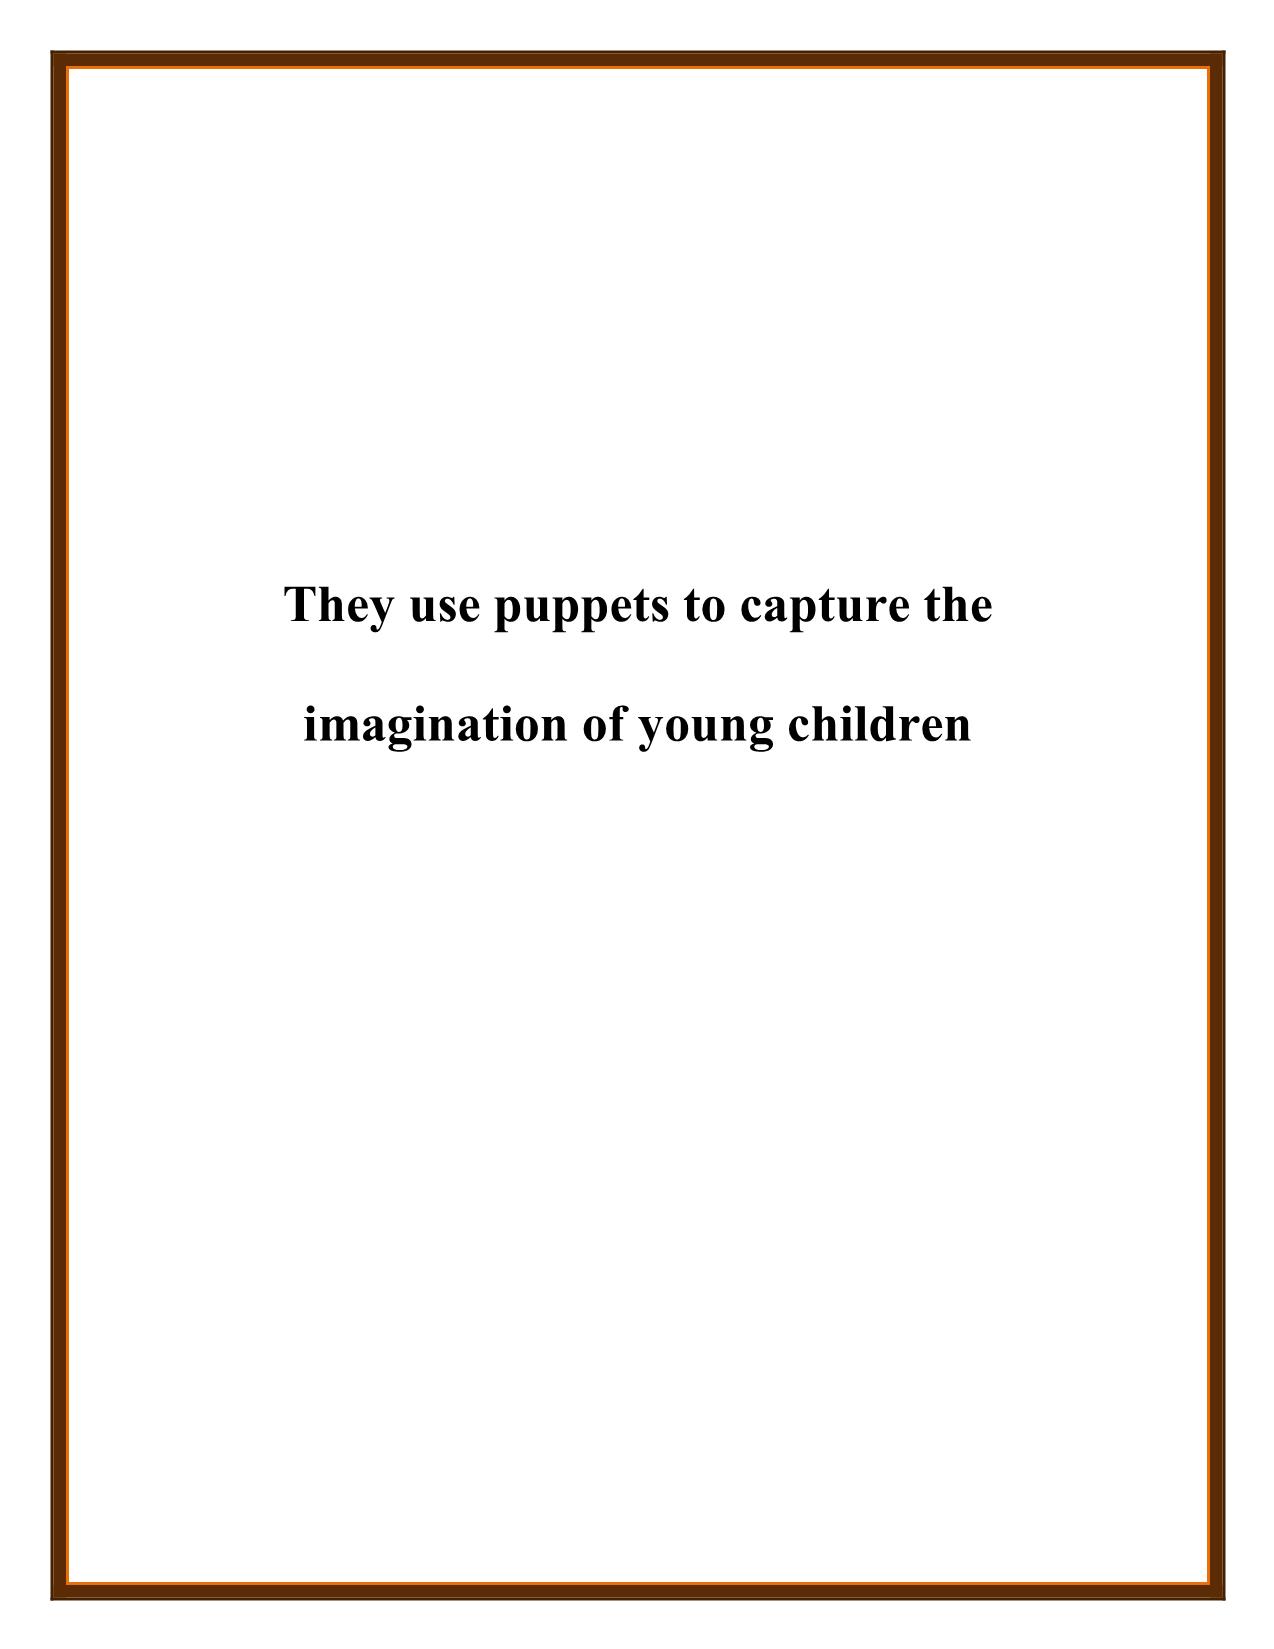 They use puppets to capture the imagination of young children trang 1